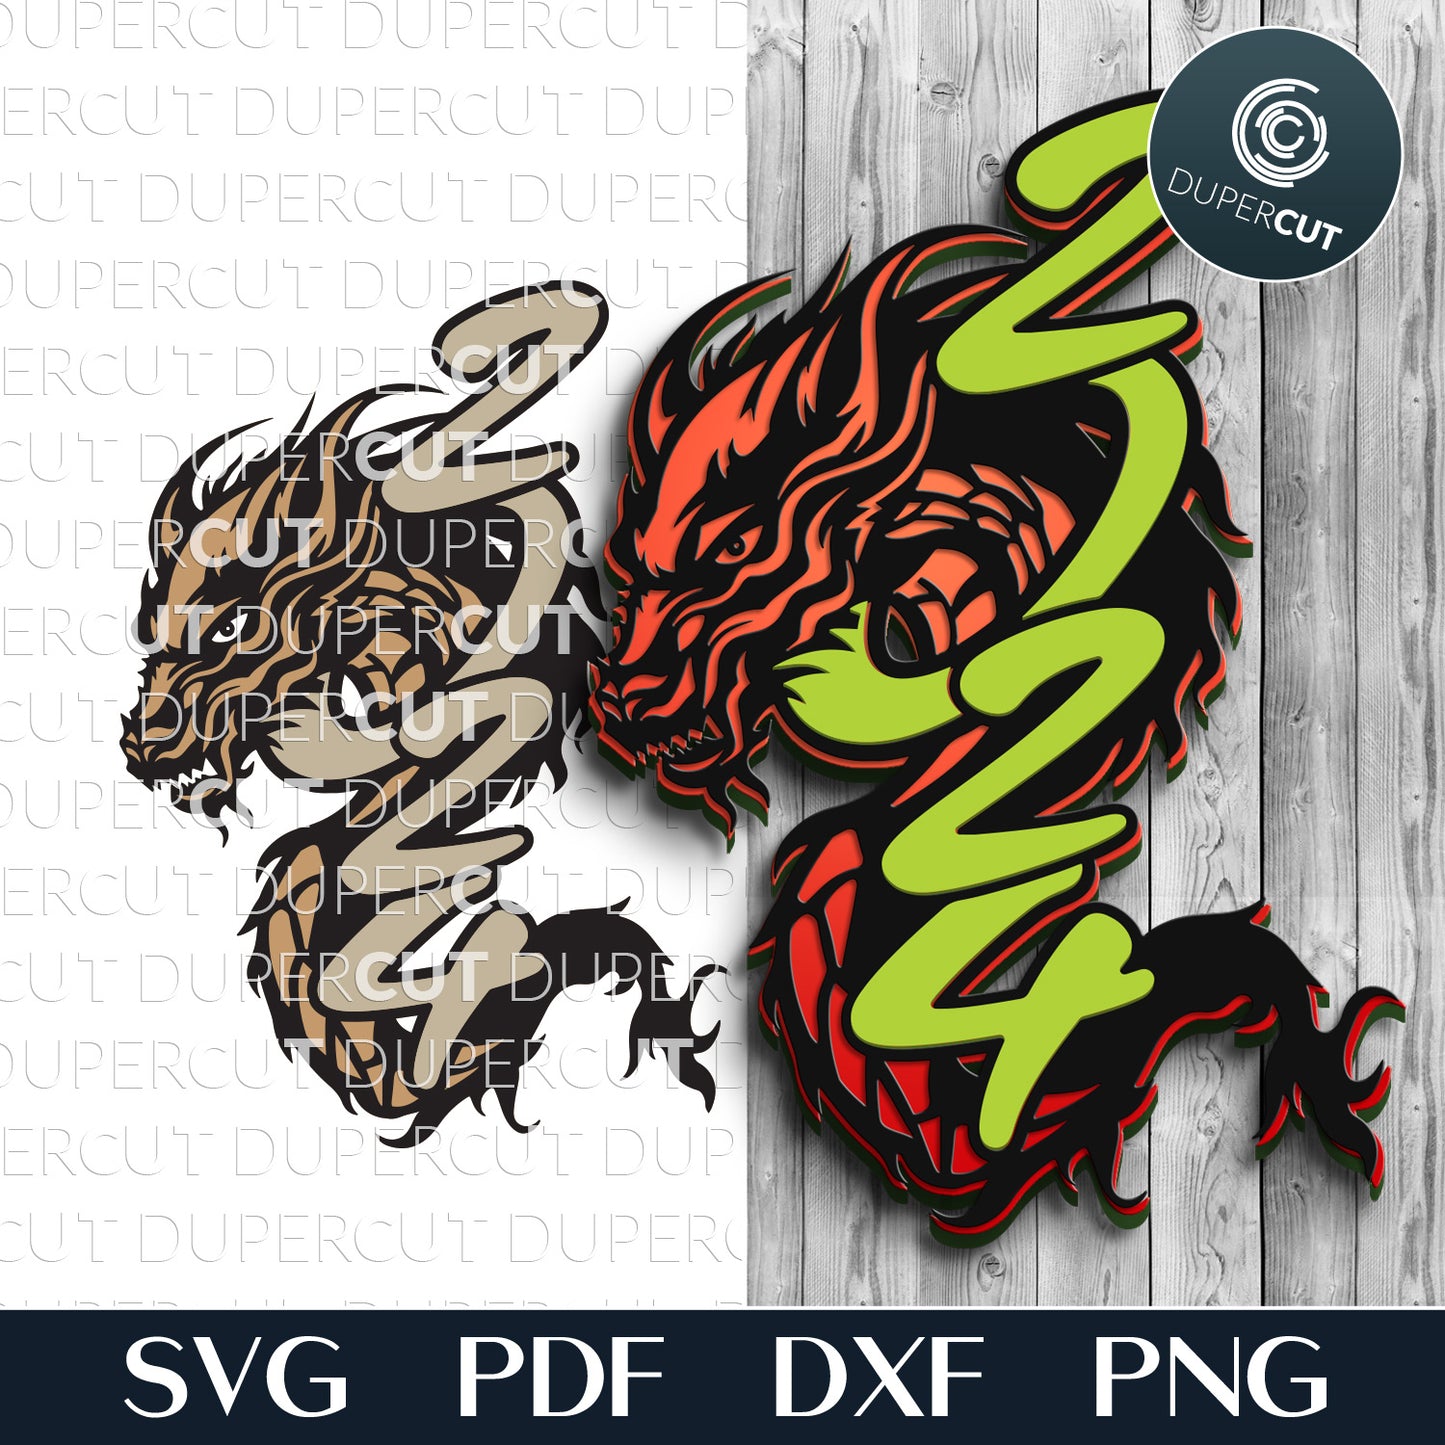 Chinese zodiac year of the Dragon - SVG DXF layered cut template for Glowforge, Cricut, Xtool, laser cutting machines by www.DuperCut.com